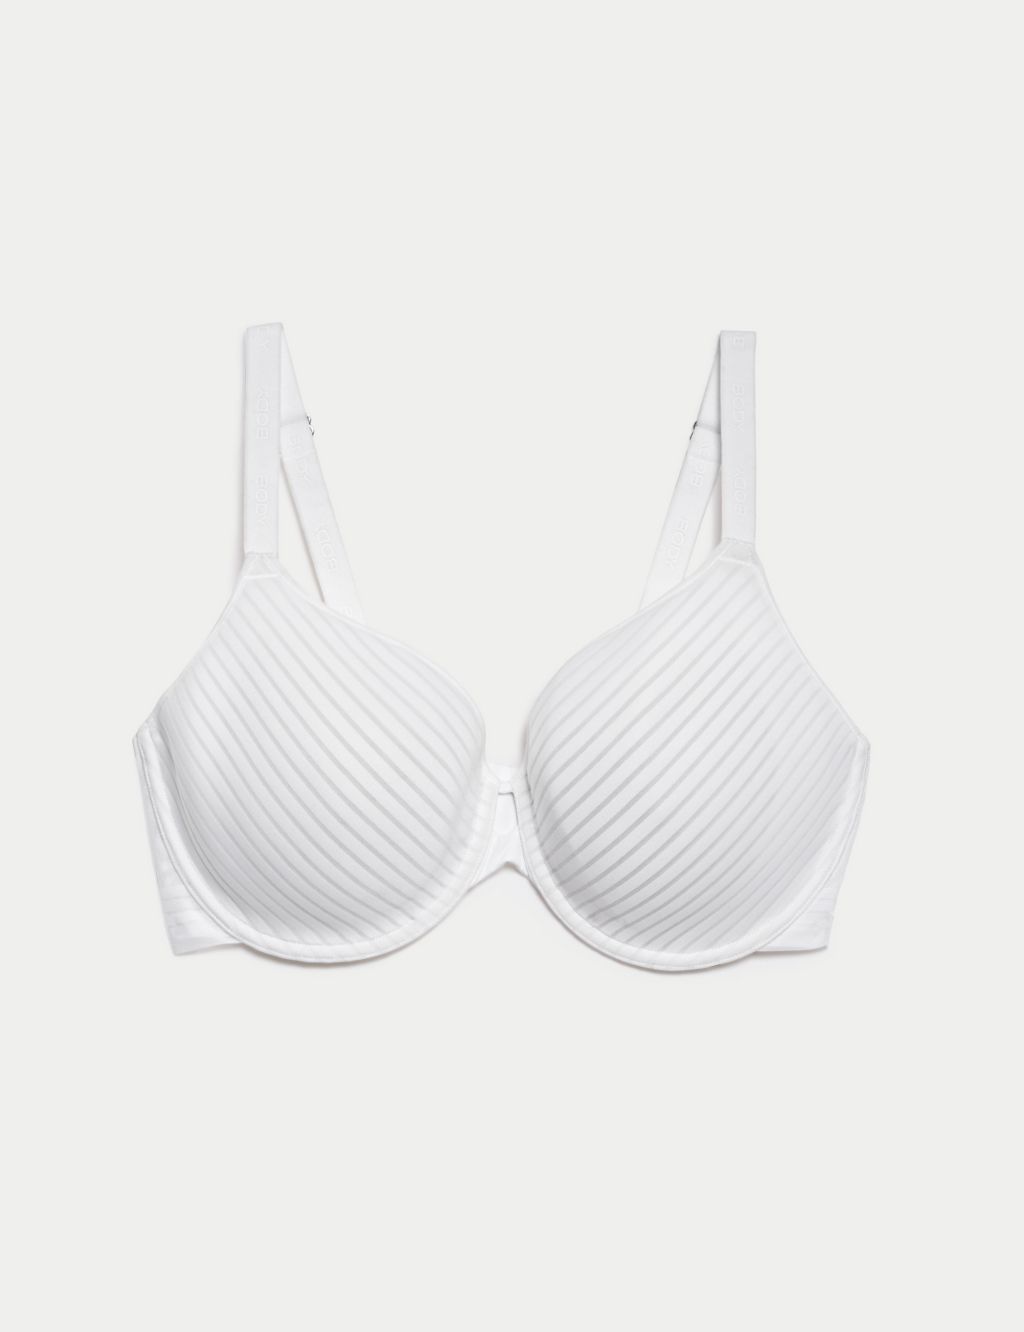 Body Define™ Wired Spacer Full Cup Bra A-E image 2